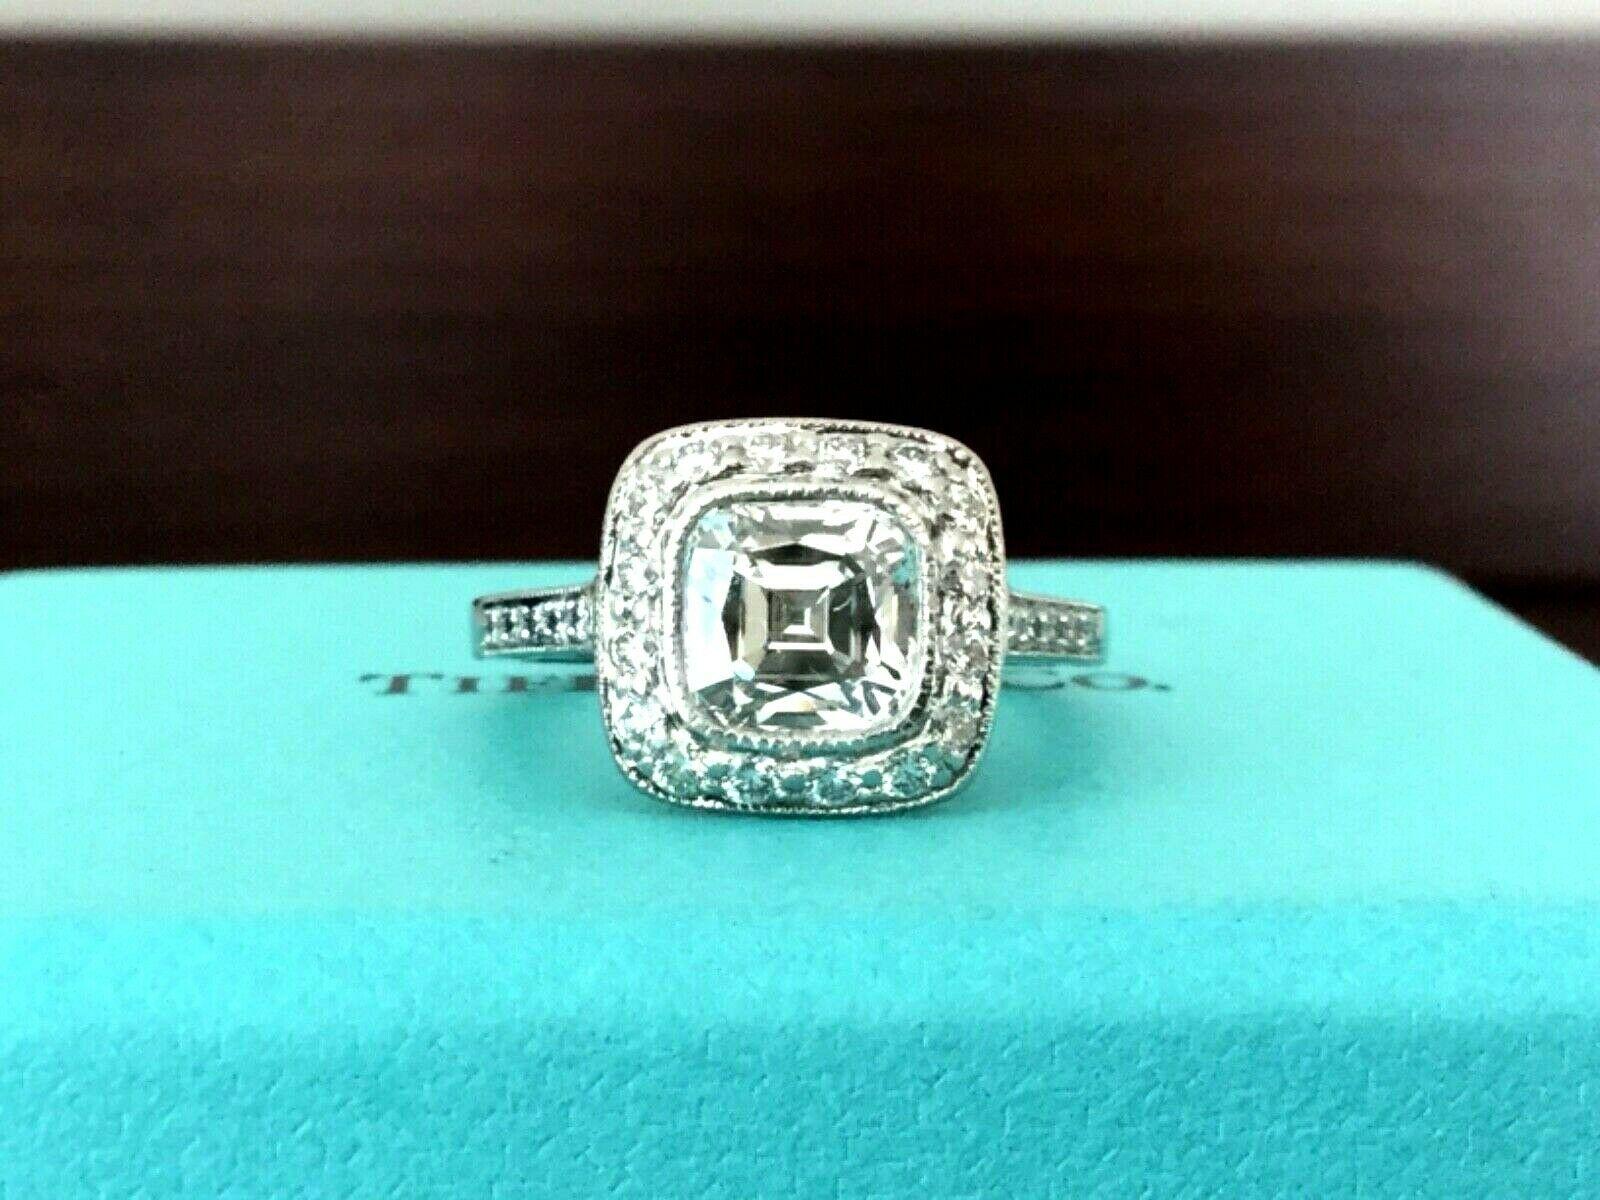 Being offered for your consideration is an amazing Tiffany & Co Platinum and Diamond 1.44 carat (1.87 TOTAL CARAT WEIGHT) natural cushion cut diamond engagement ring set in the classic LEGACY pave diamond band..  The diamond is HUGE on this amazing